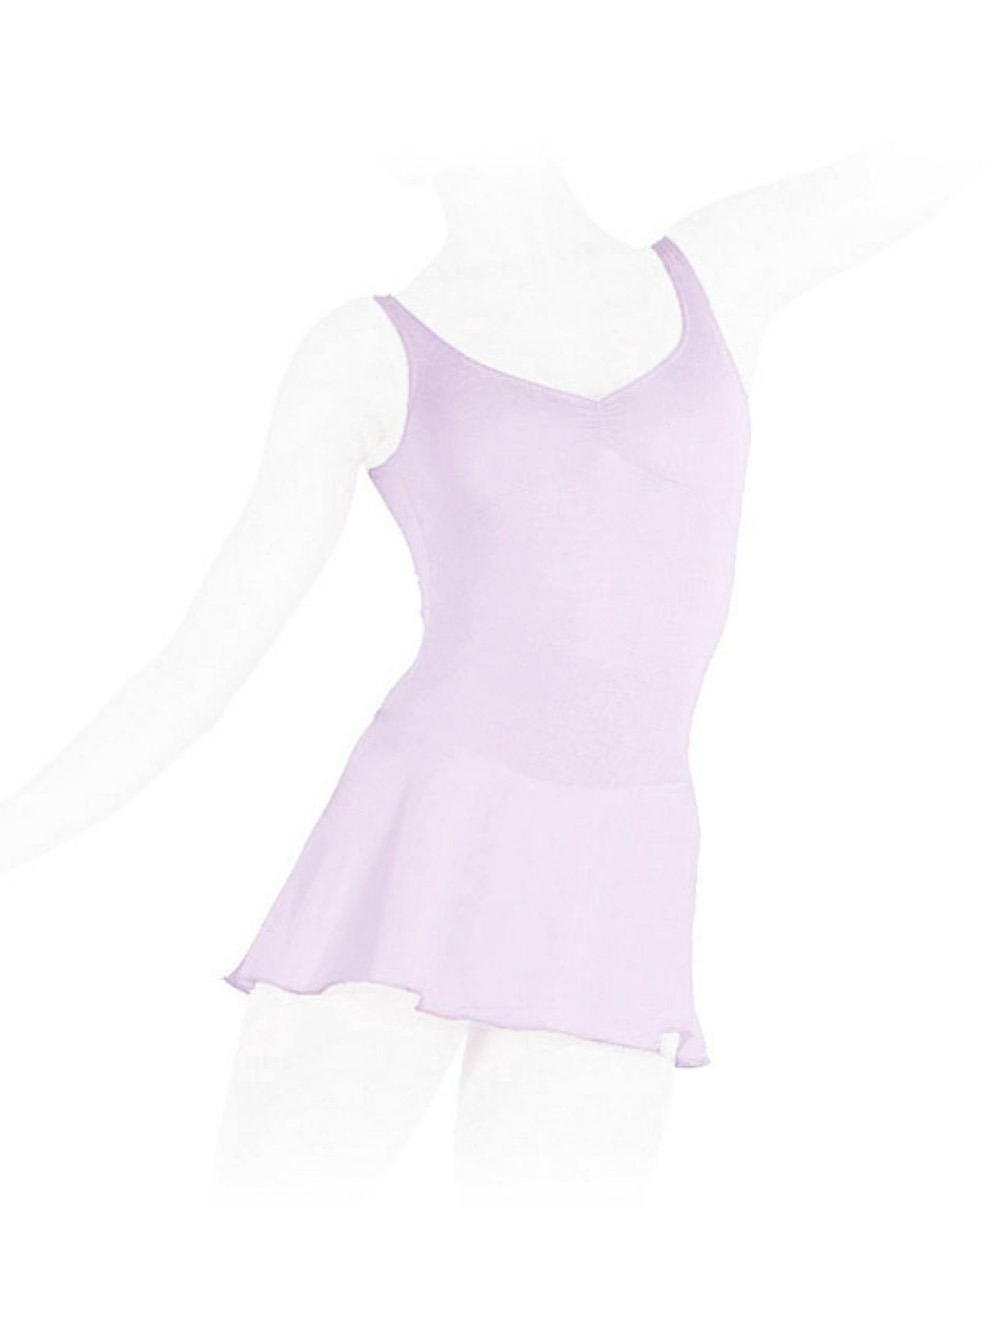 THIN STRAPS TUNIC FOR GIRLS - PALE PINK - NISARAT